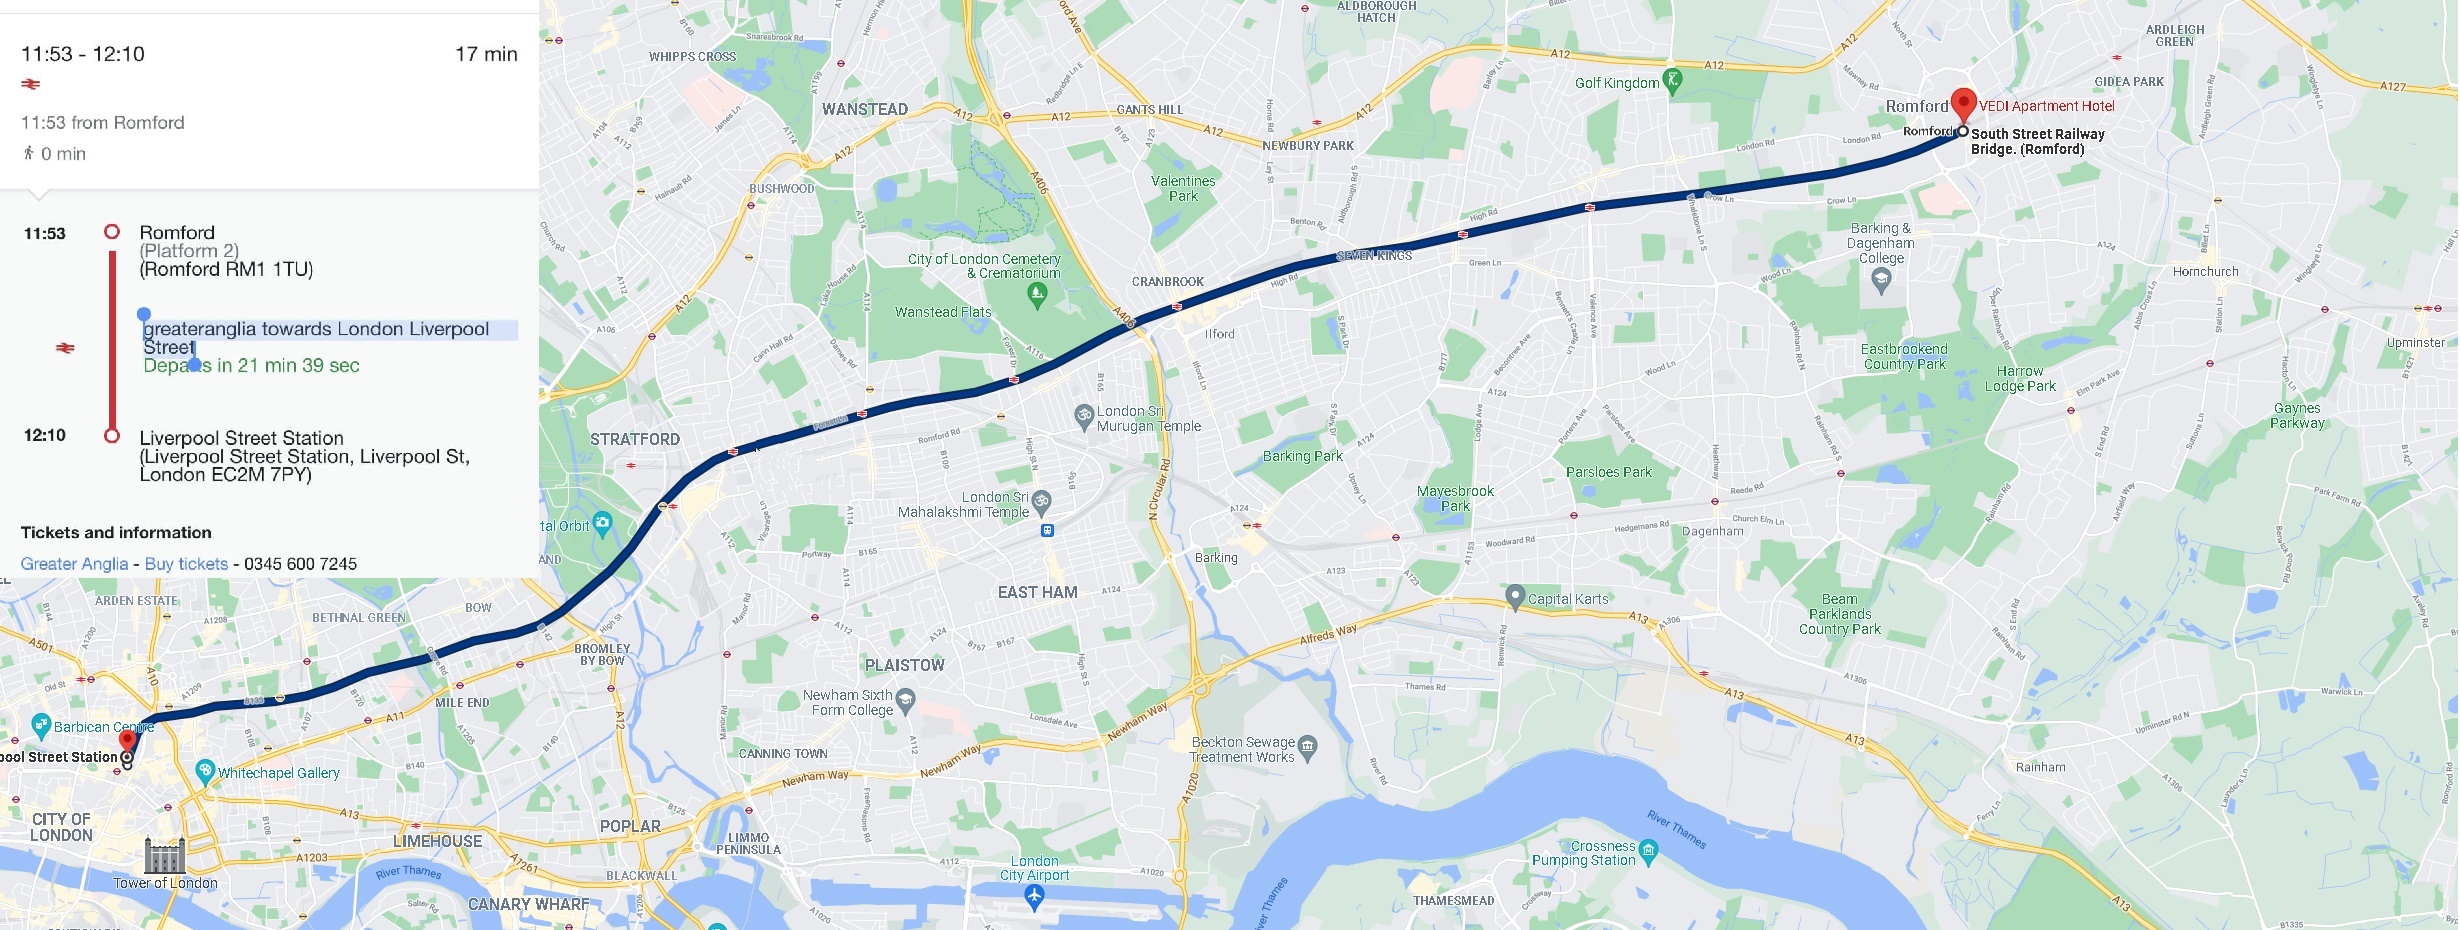 Hotel VEDI Aparthotel. Map route from Romford train station to Liverpool street